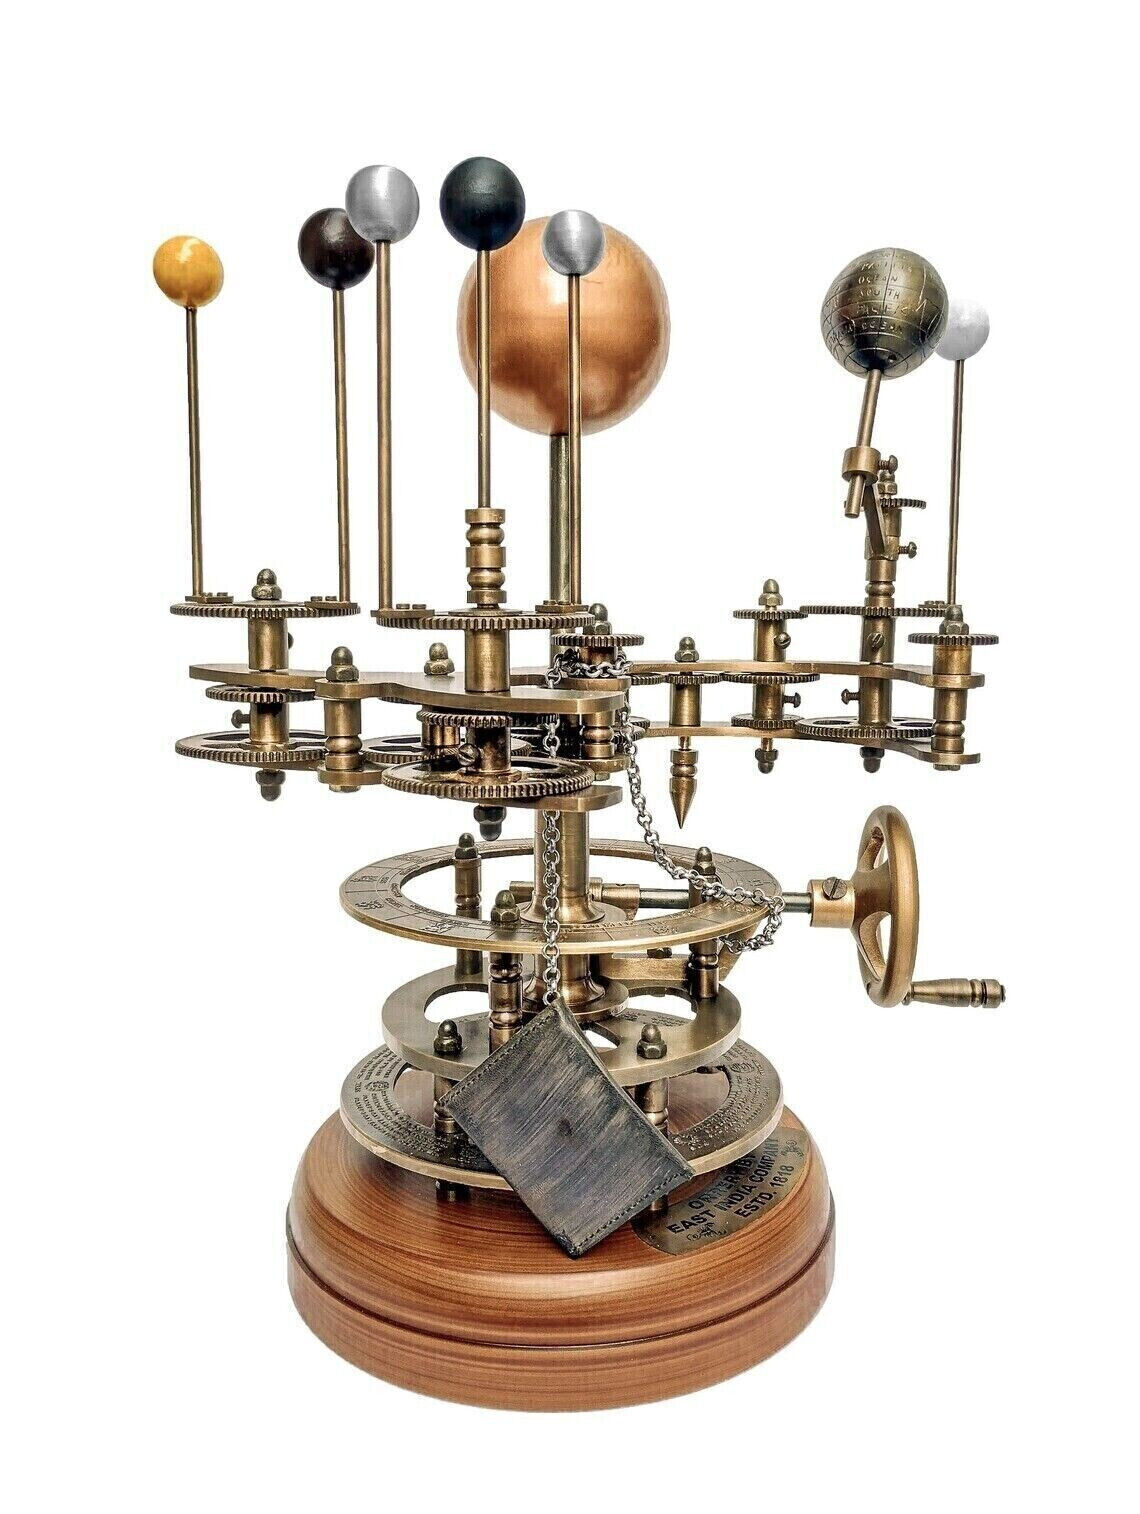 The Grand Celestial Atlas: A Stunningly Detailed Orrery of the Inner Planets